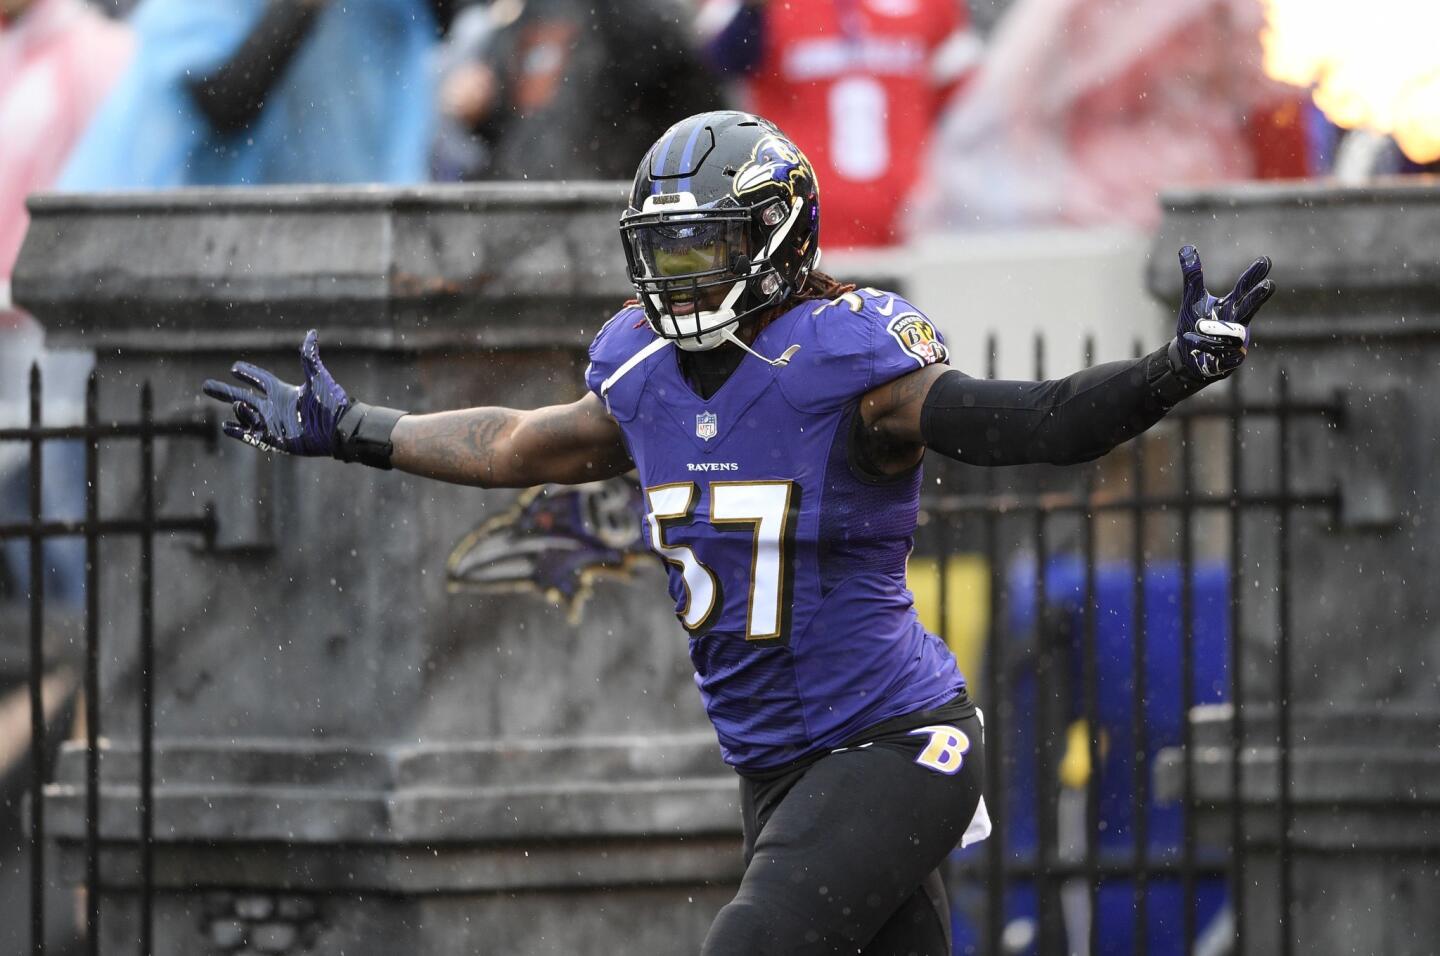 Baltimore Ravens inside linebacker C.J. Mosley runs onto the field before an NFL football game against the Tampa Bay Buccaneers, Sunday, Dec. 16, 2018, in Baltimore.